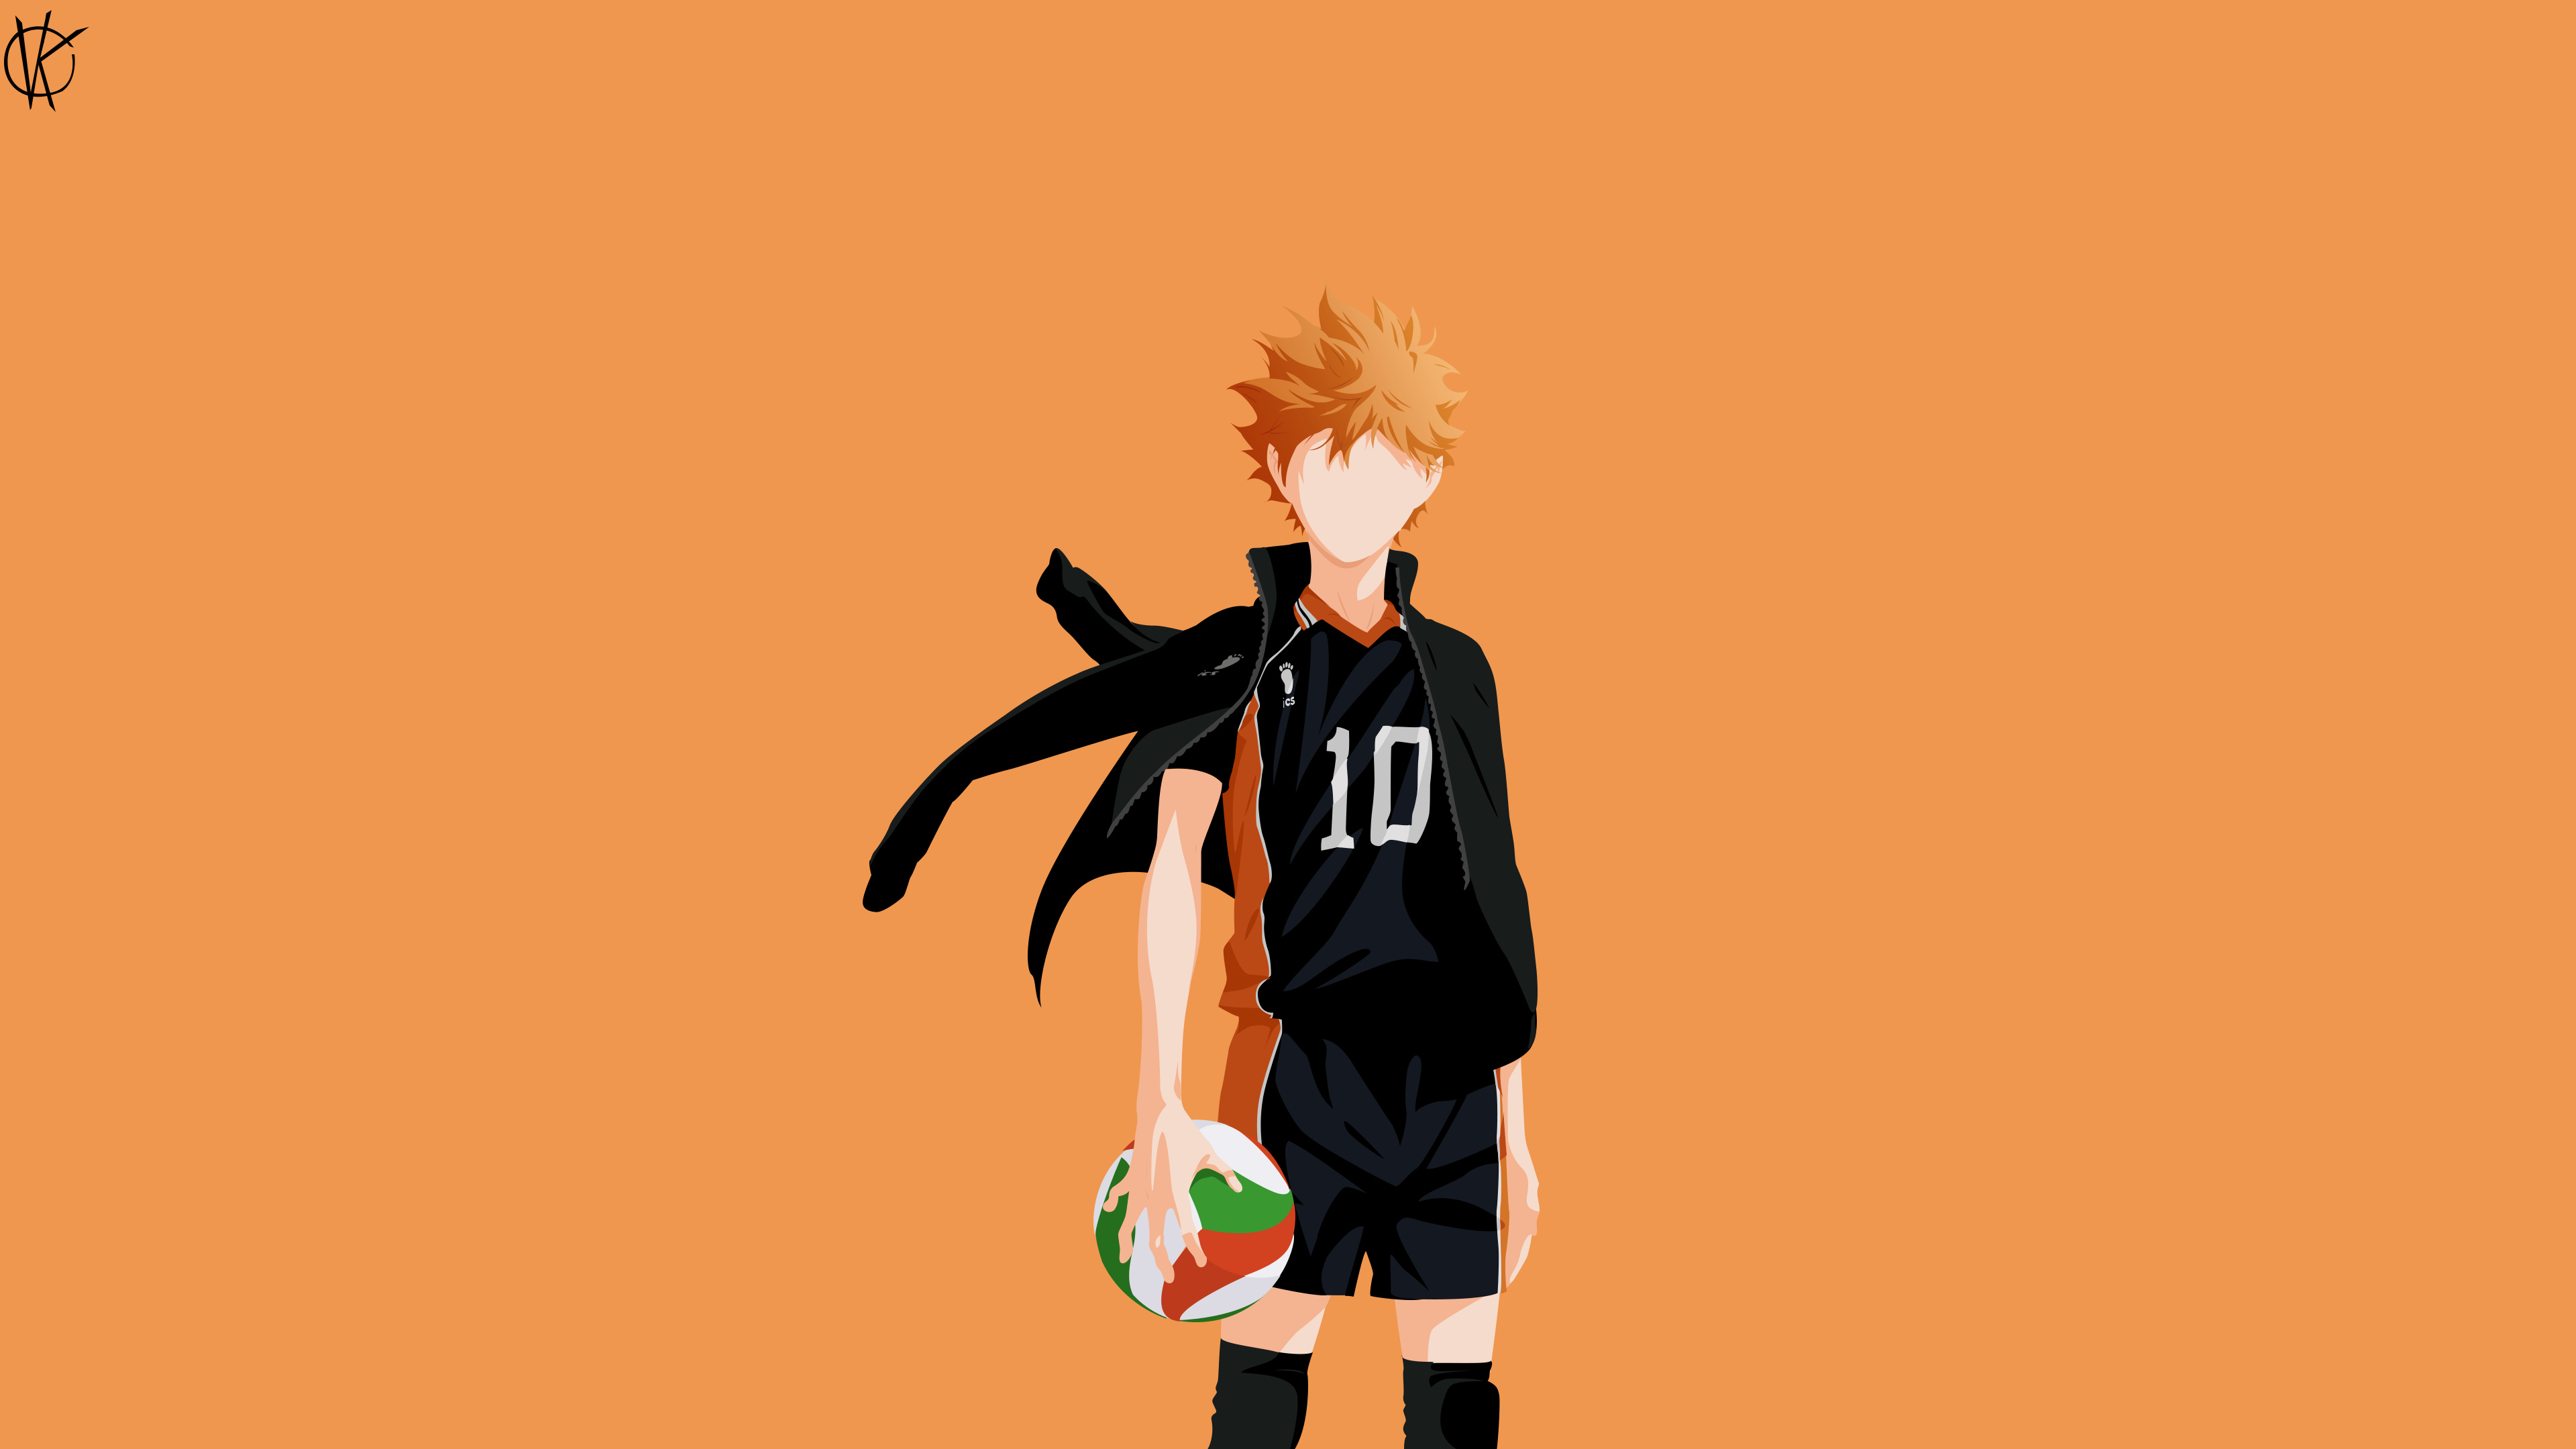 Haikyuu!!: Minimalistic, Shoyo Hinata, A boy determined to become a great volleyball player. 3840x2160 4K Background.